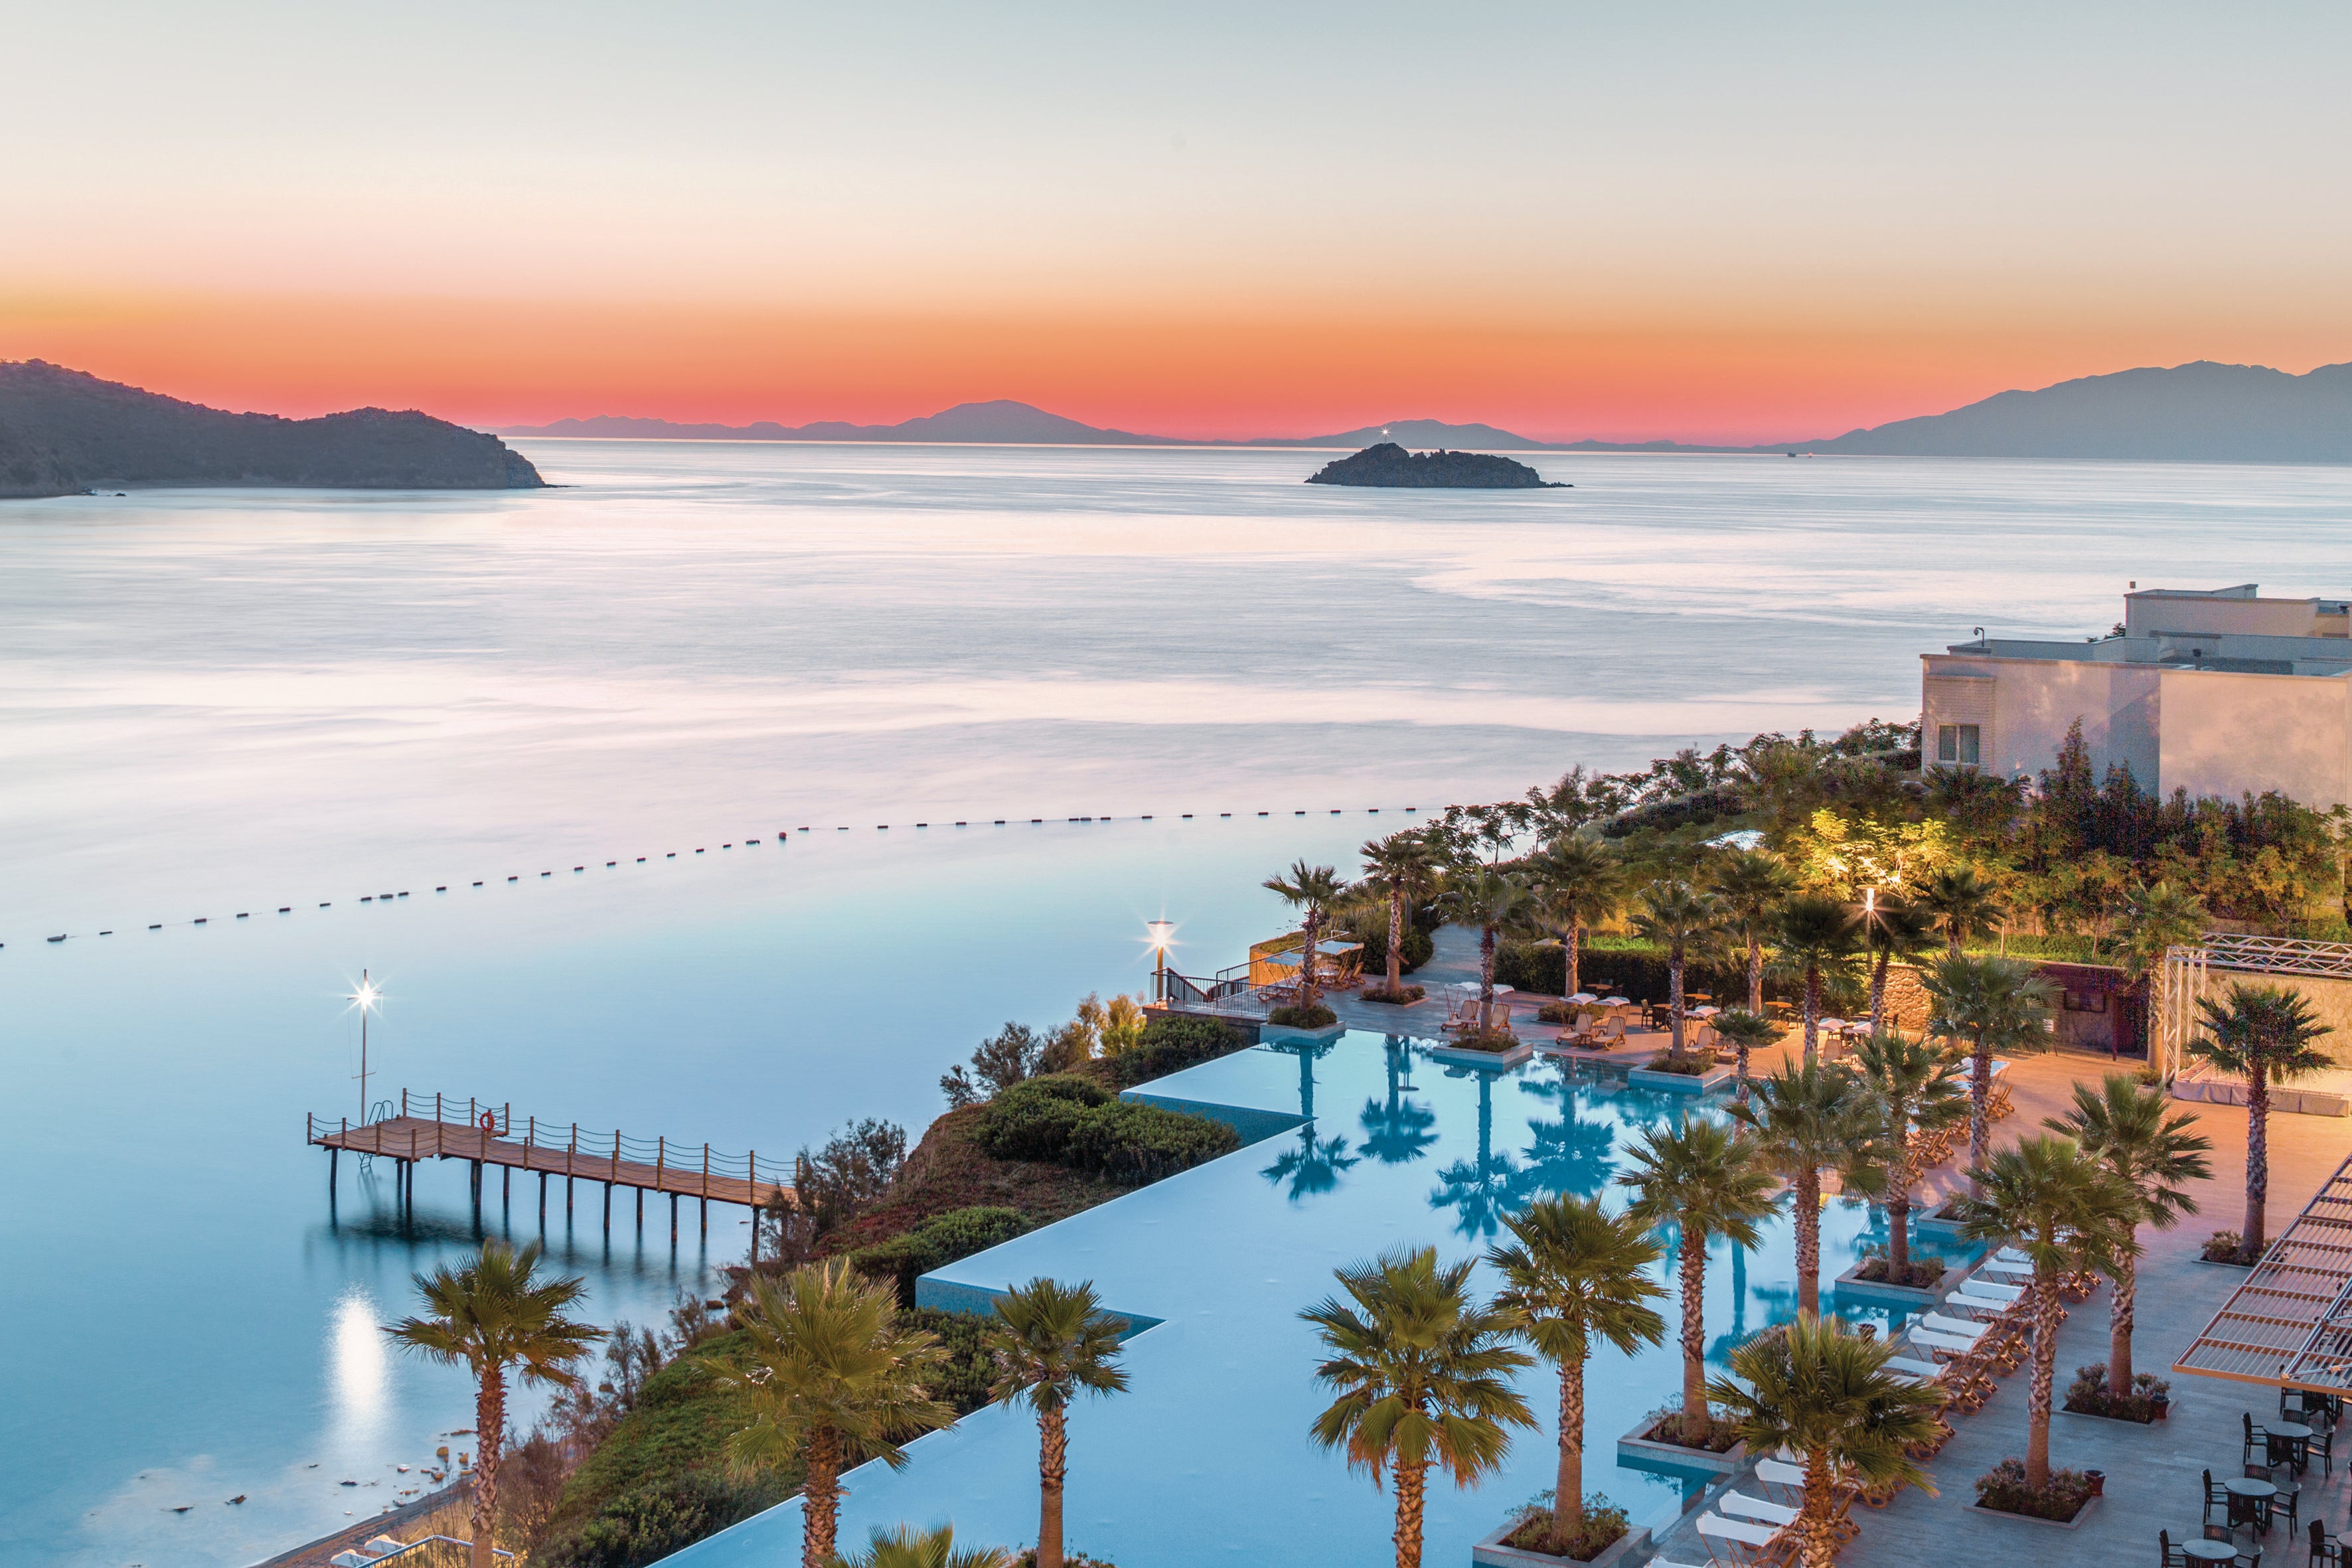 Book yourself in for an unforgettable getaway with a luxury break in Turkey – such as a stay at Bodrum’s idyllic Xanadu Island resort